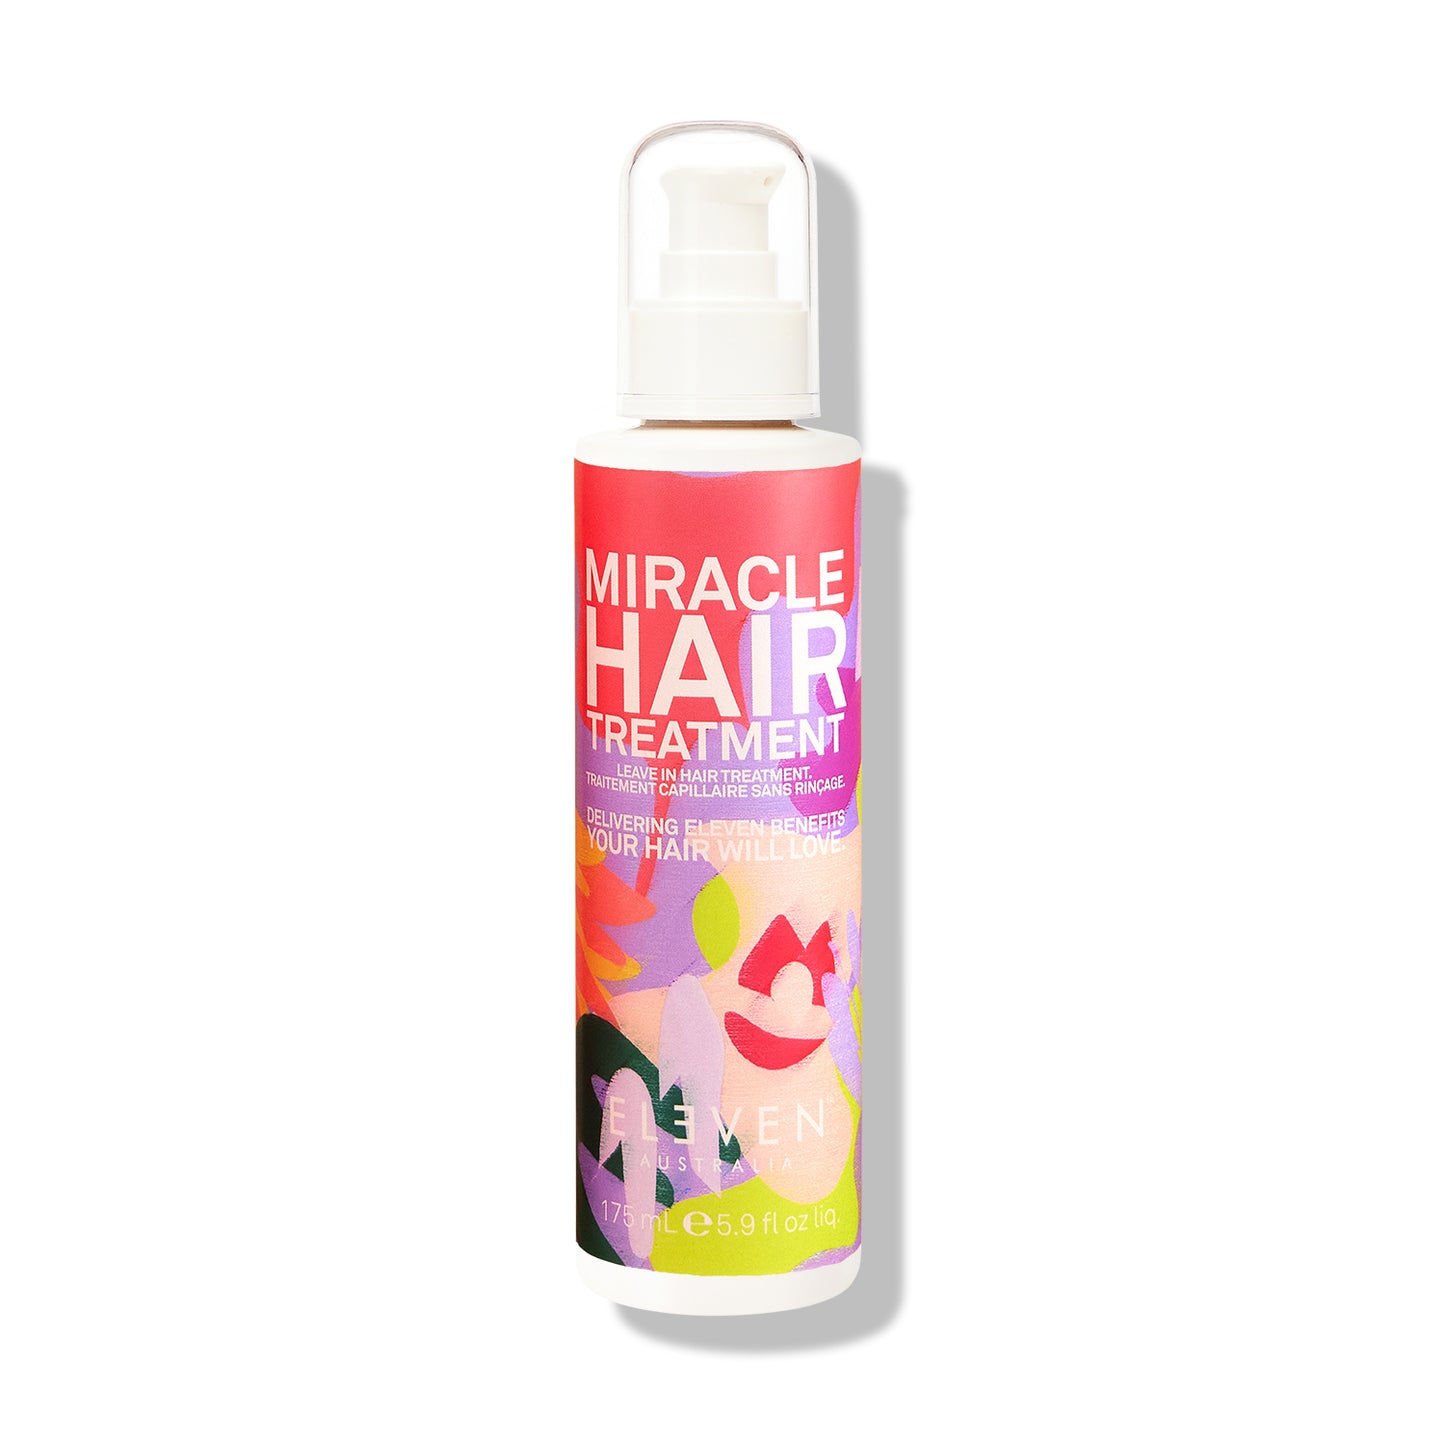 LIMITED EDITION MIRACLE HAIR TREATMENT 175ml